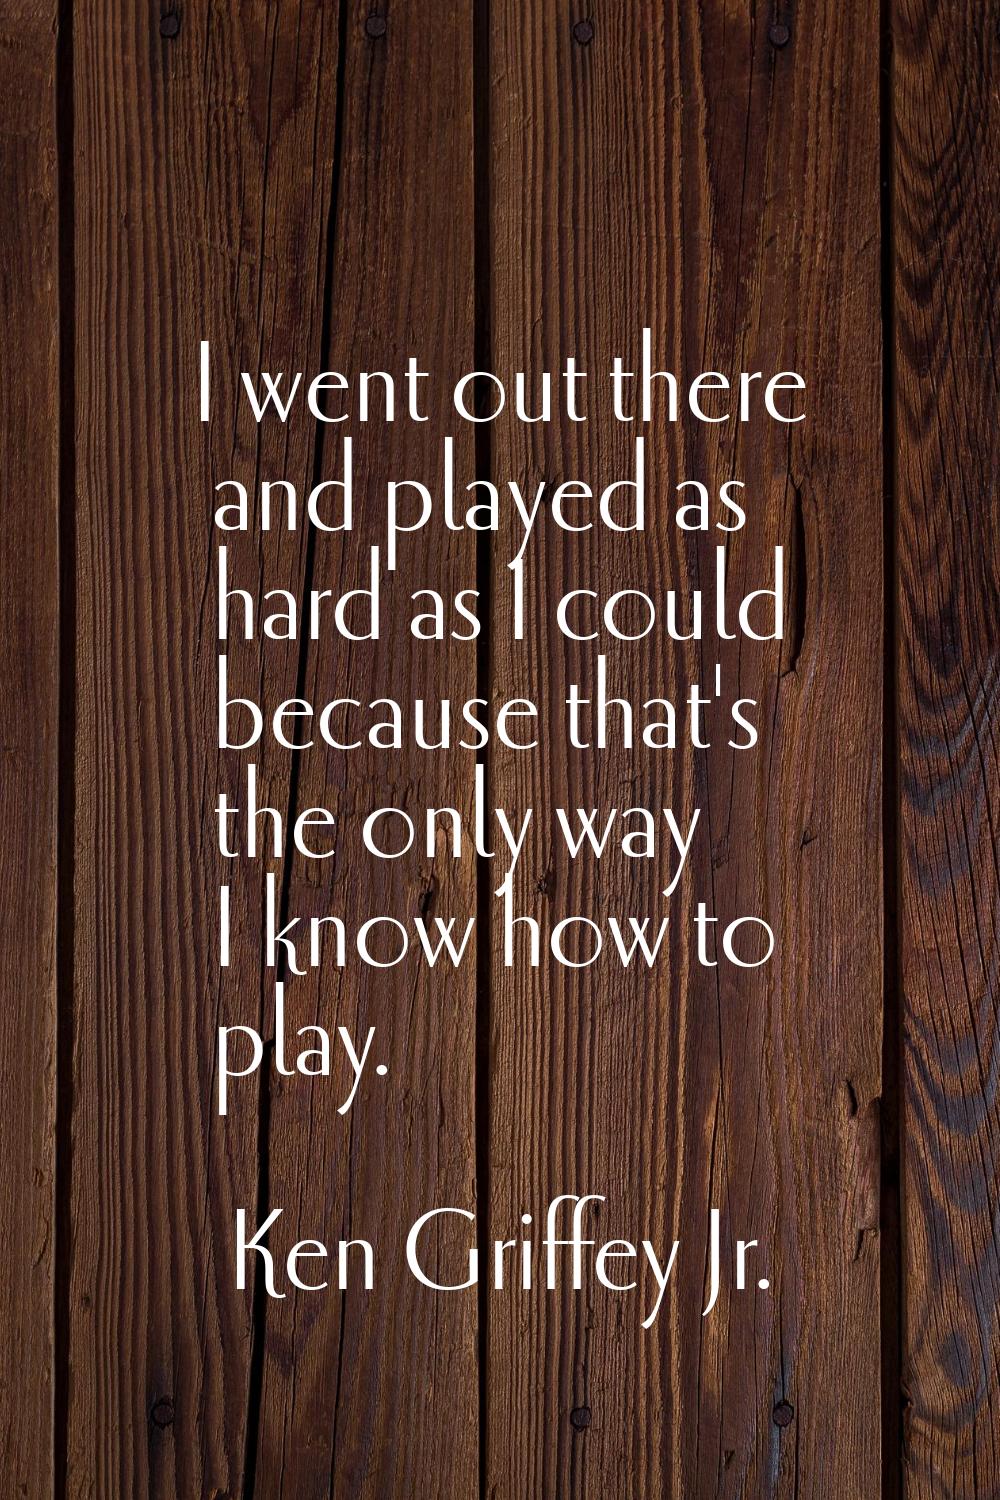 I went out there and played as hard as I could because that's the only way I know how to play.